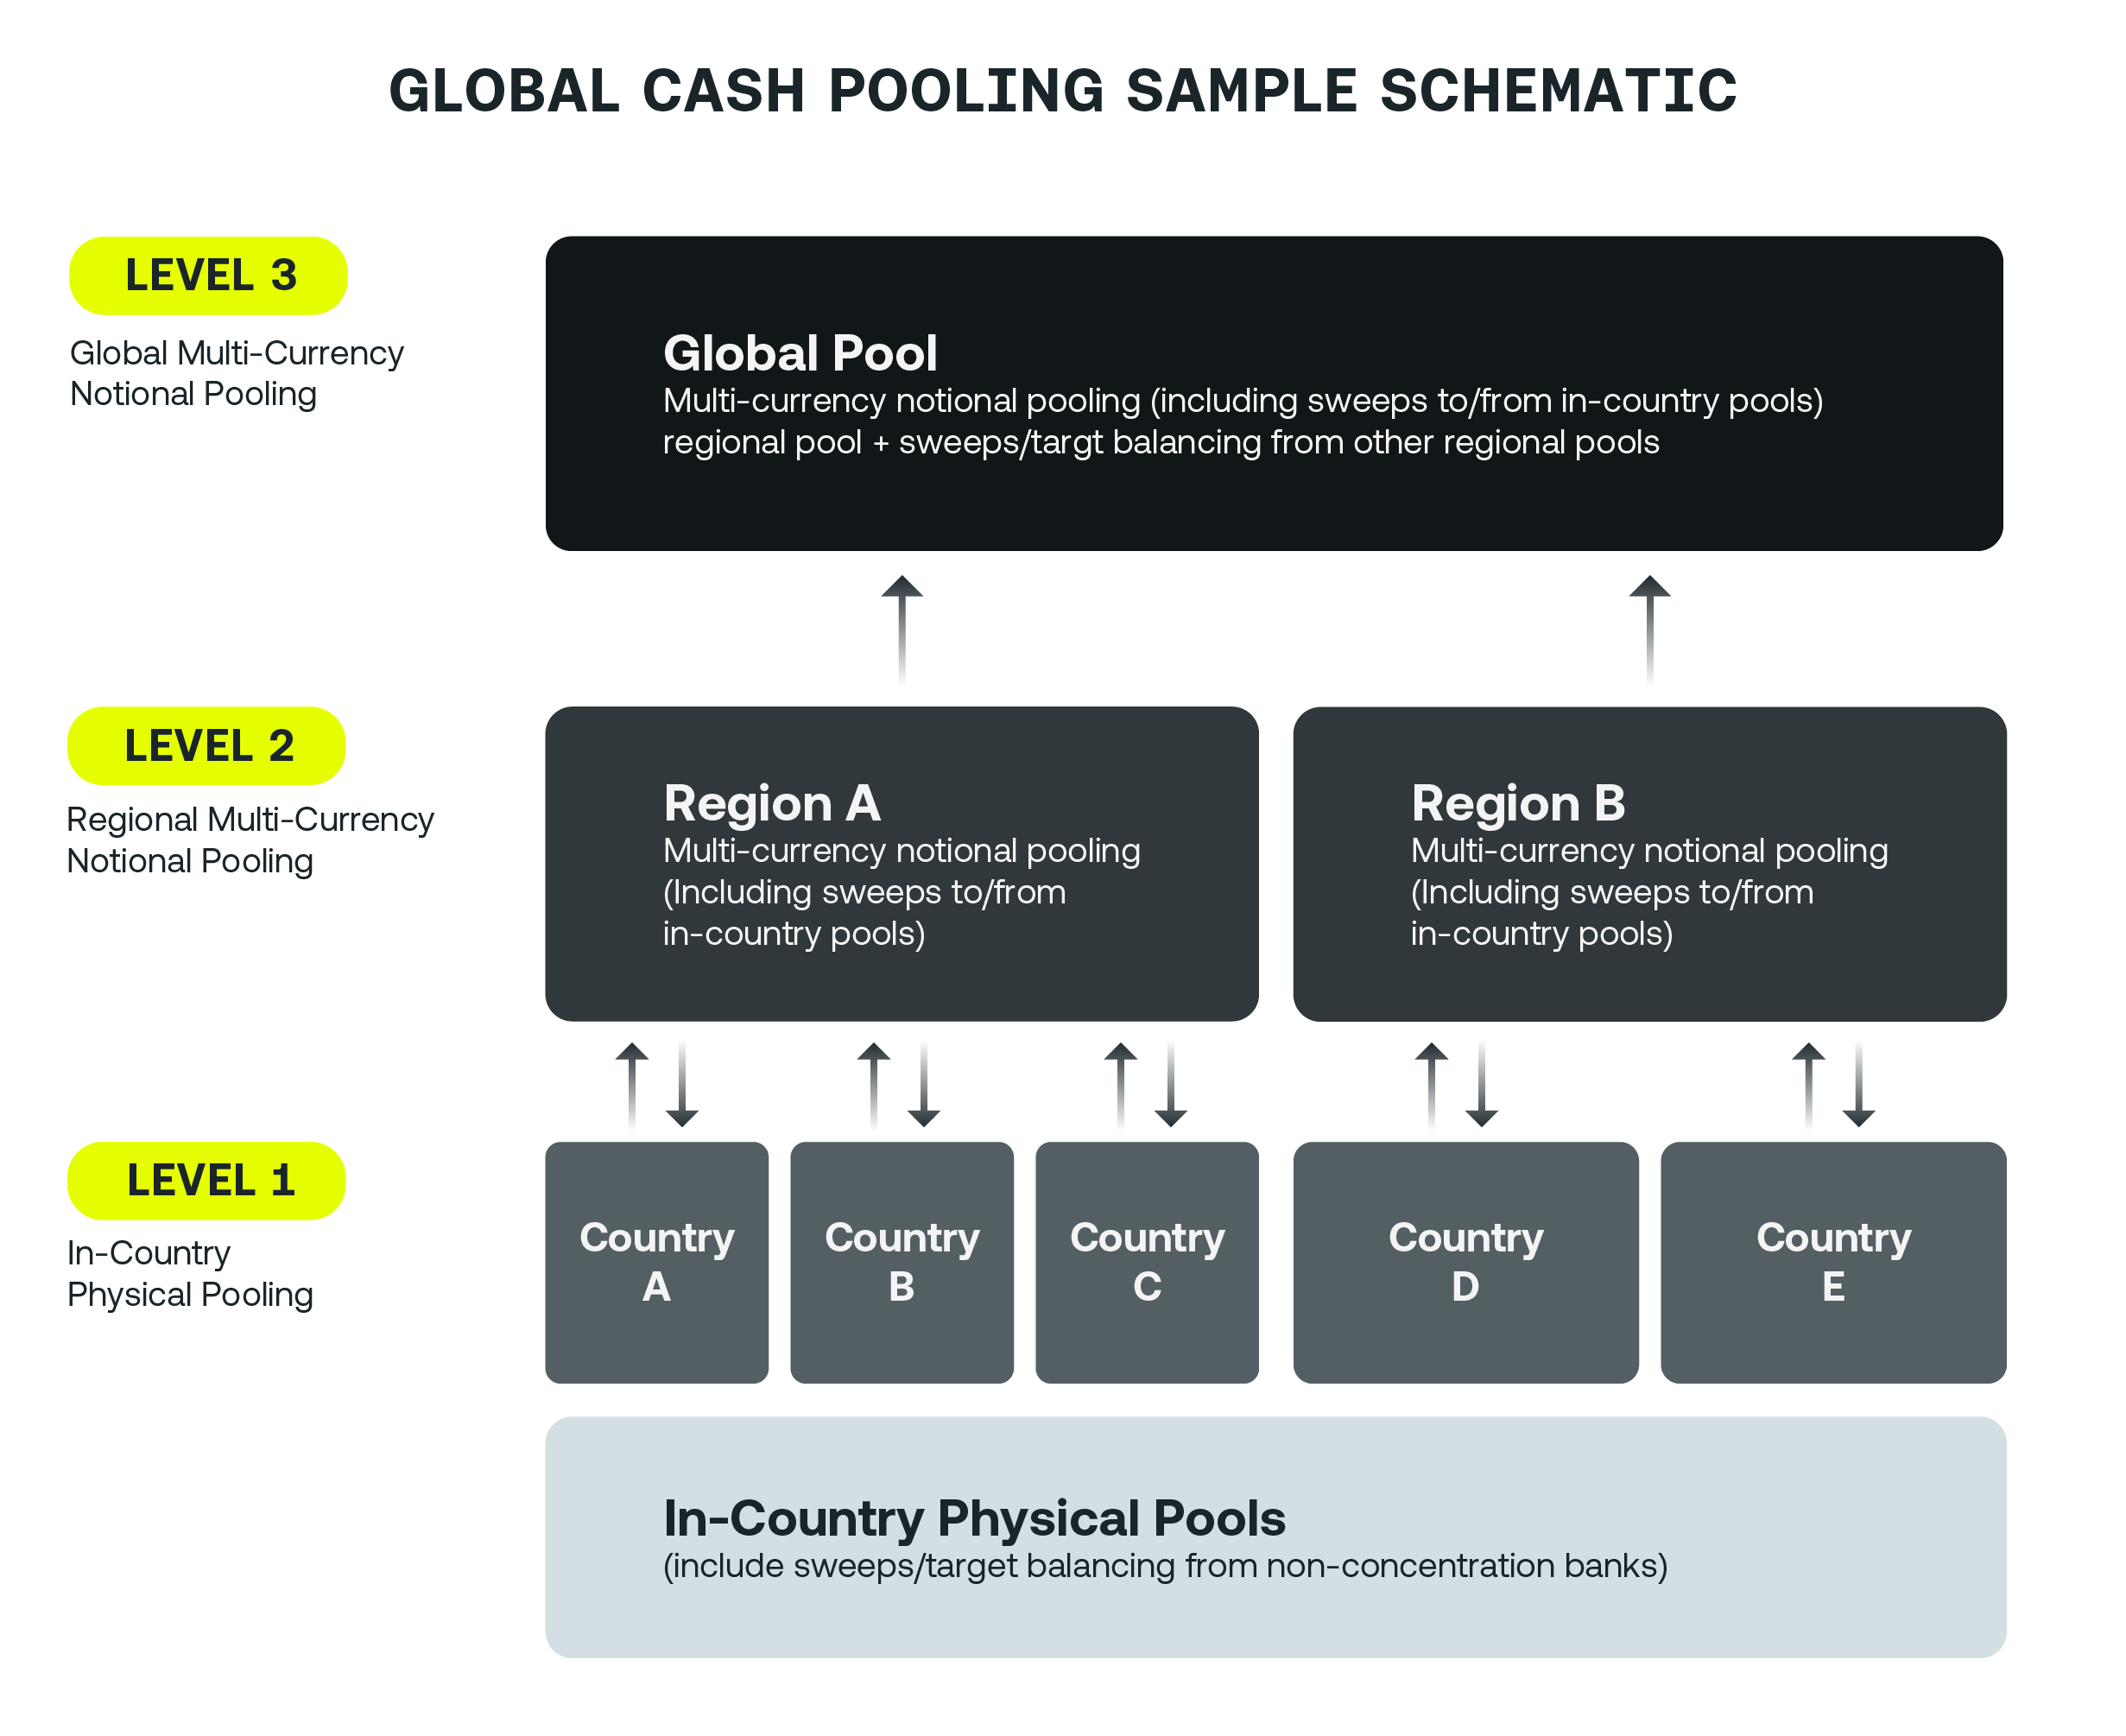 Global Cash Pooling Sample Schematic